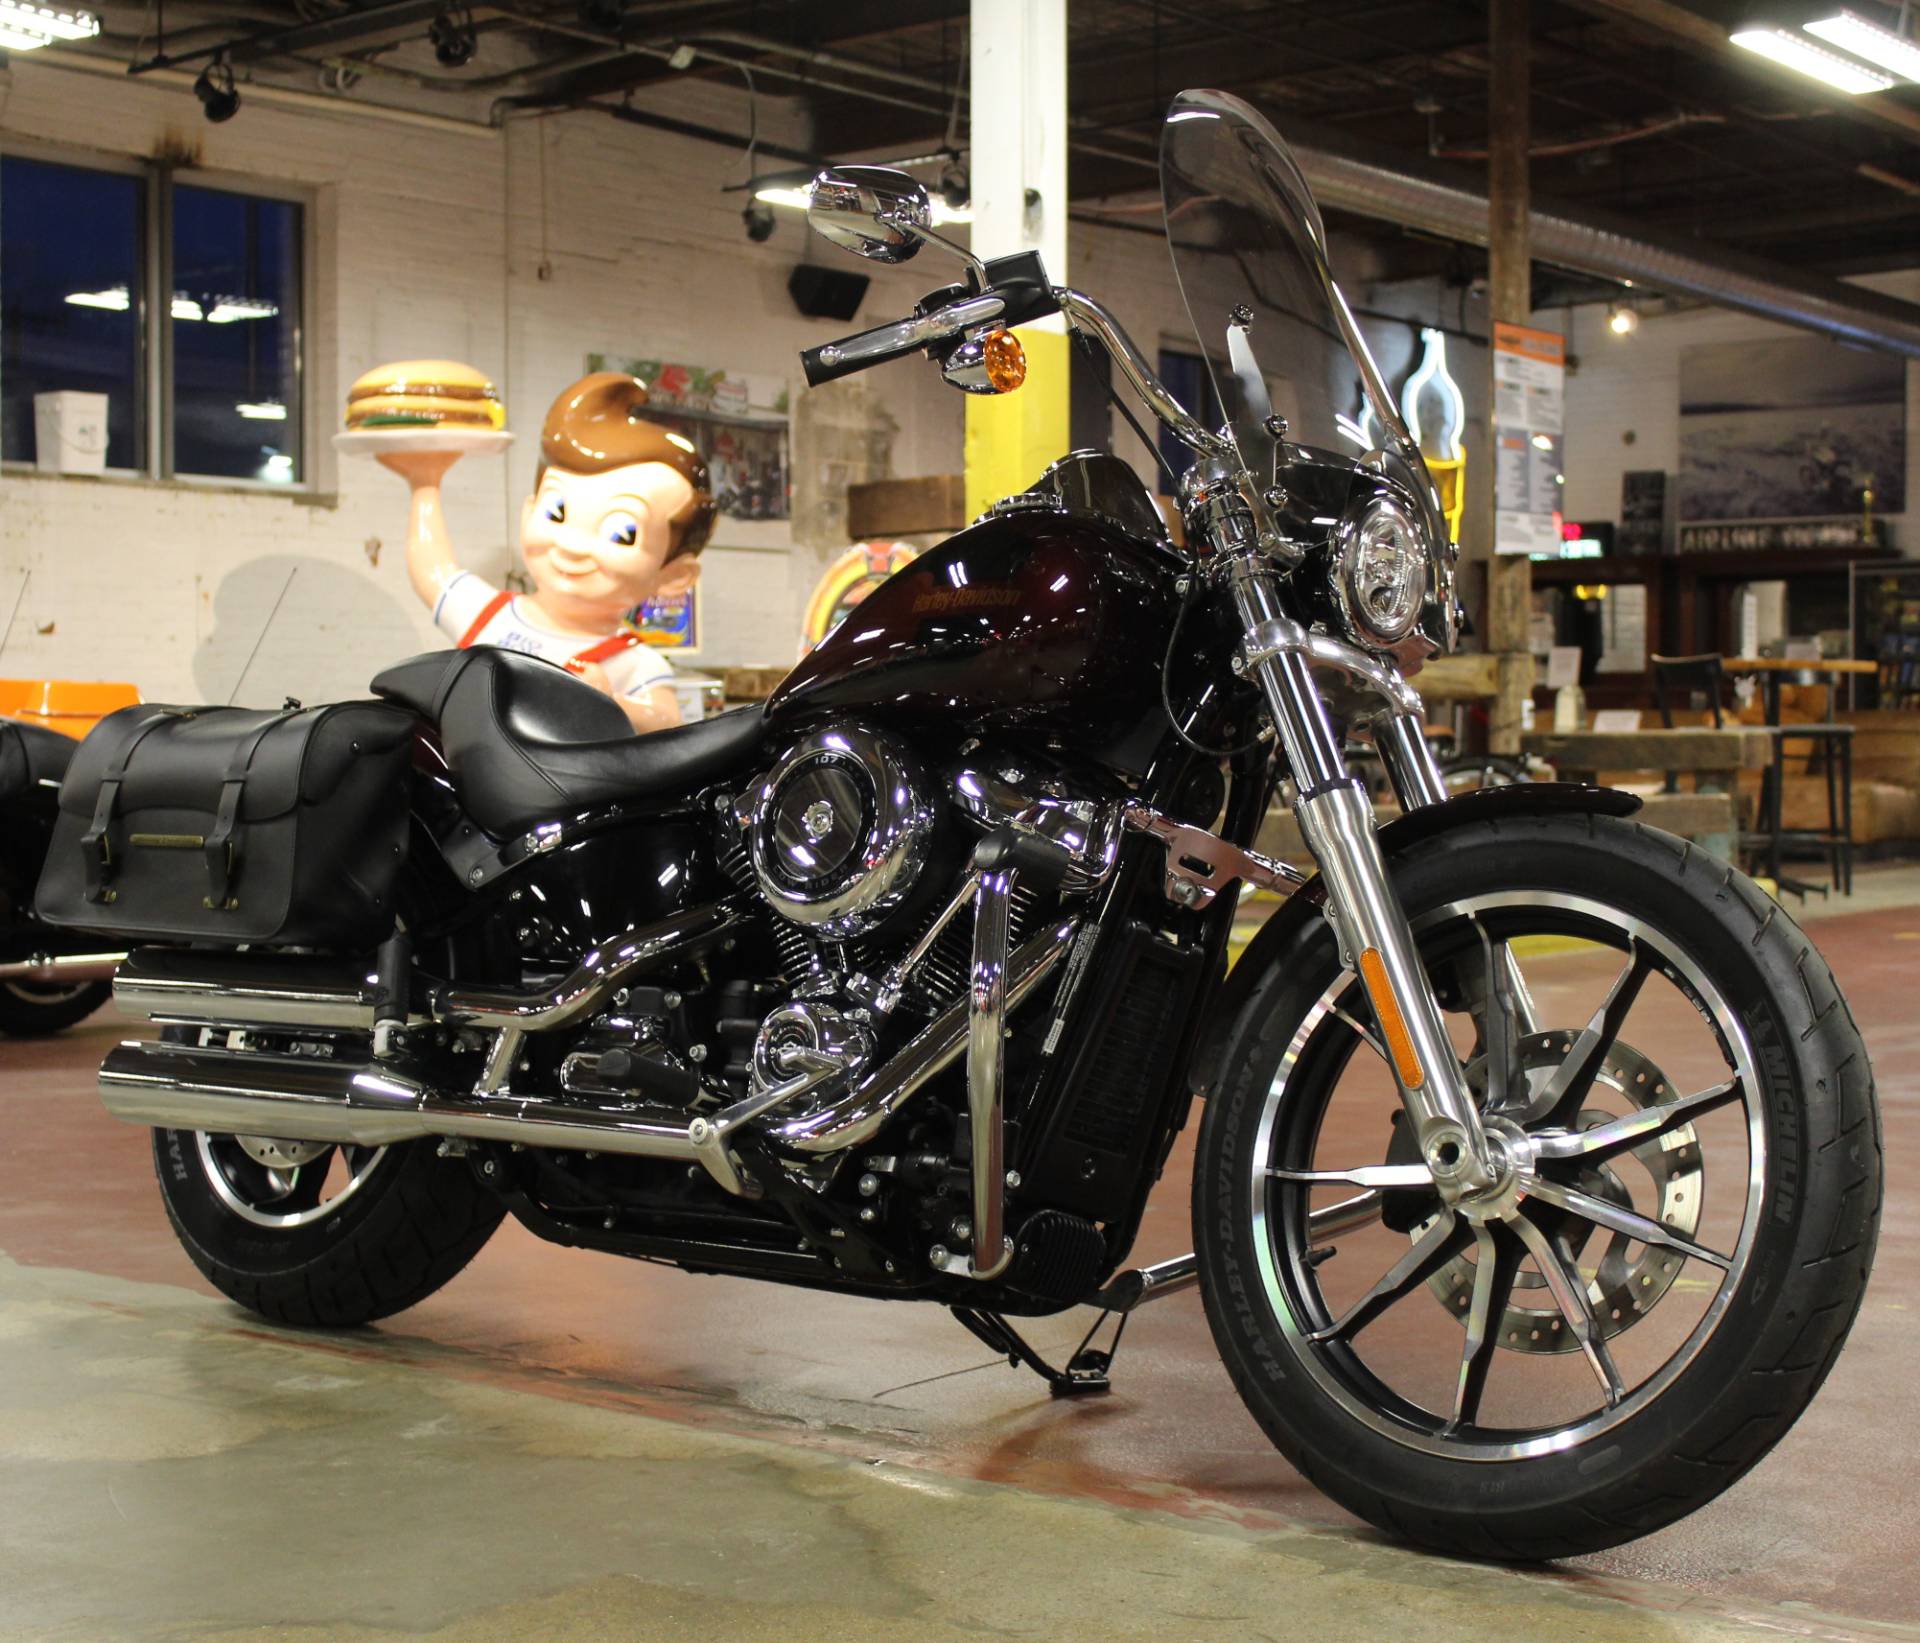 2019 Harley-Davidson Low Rider® in New London, Connecticut - Photo 2